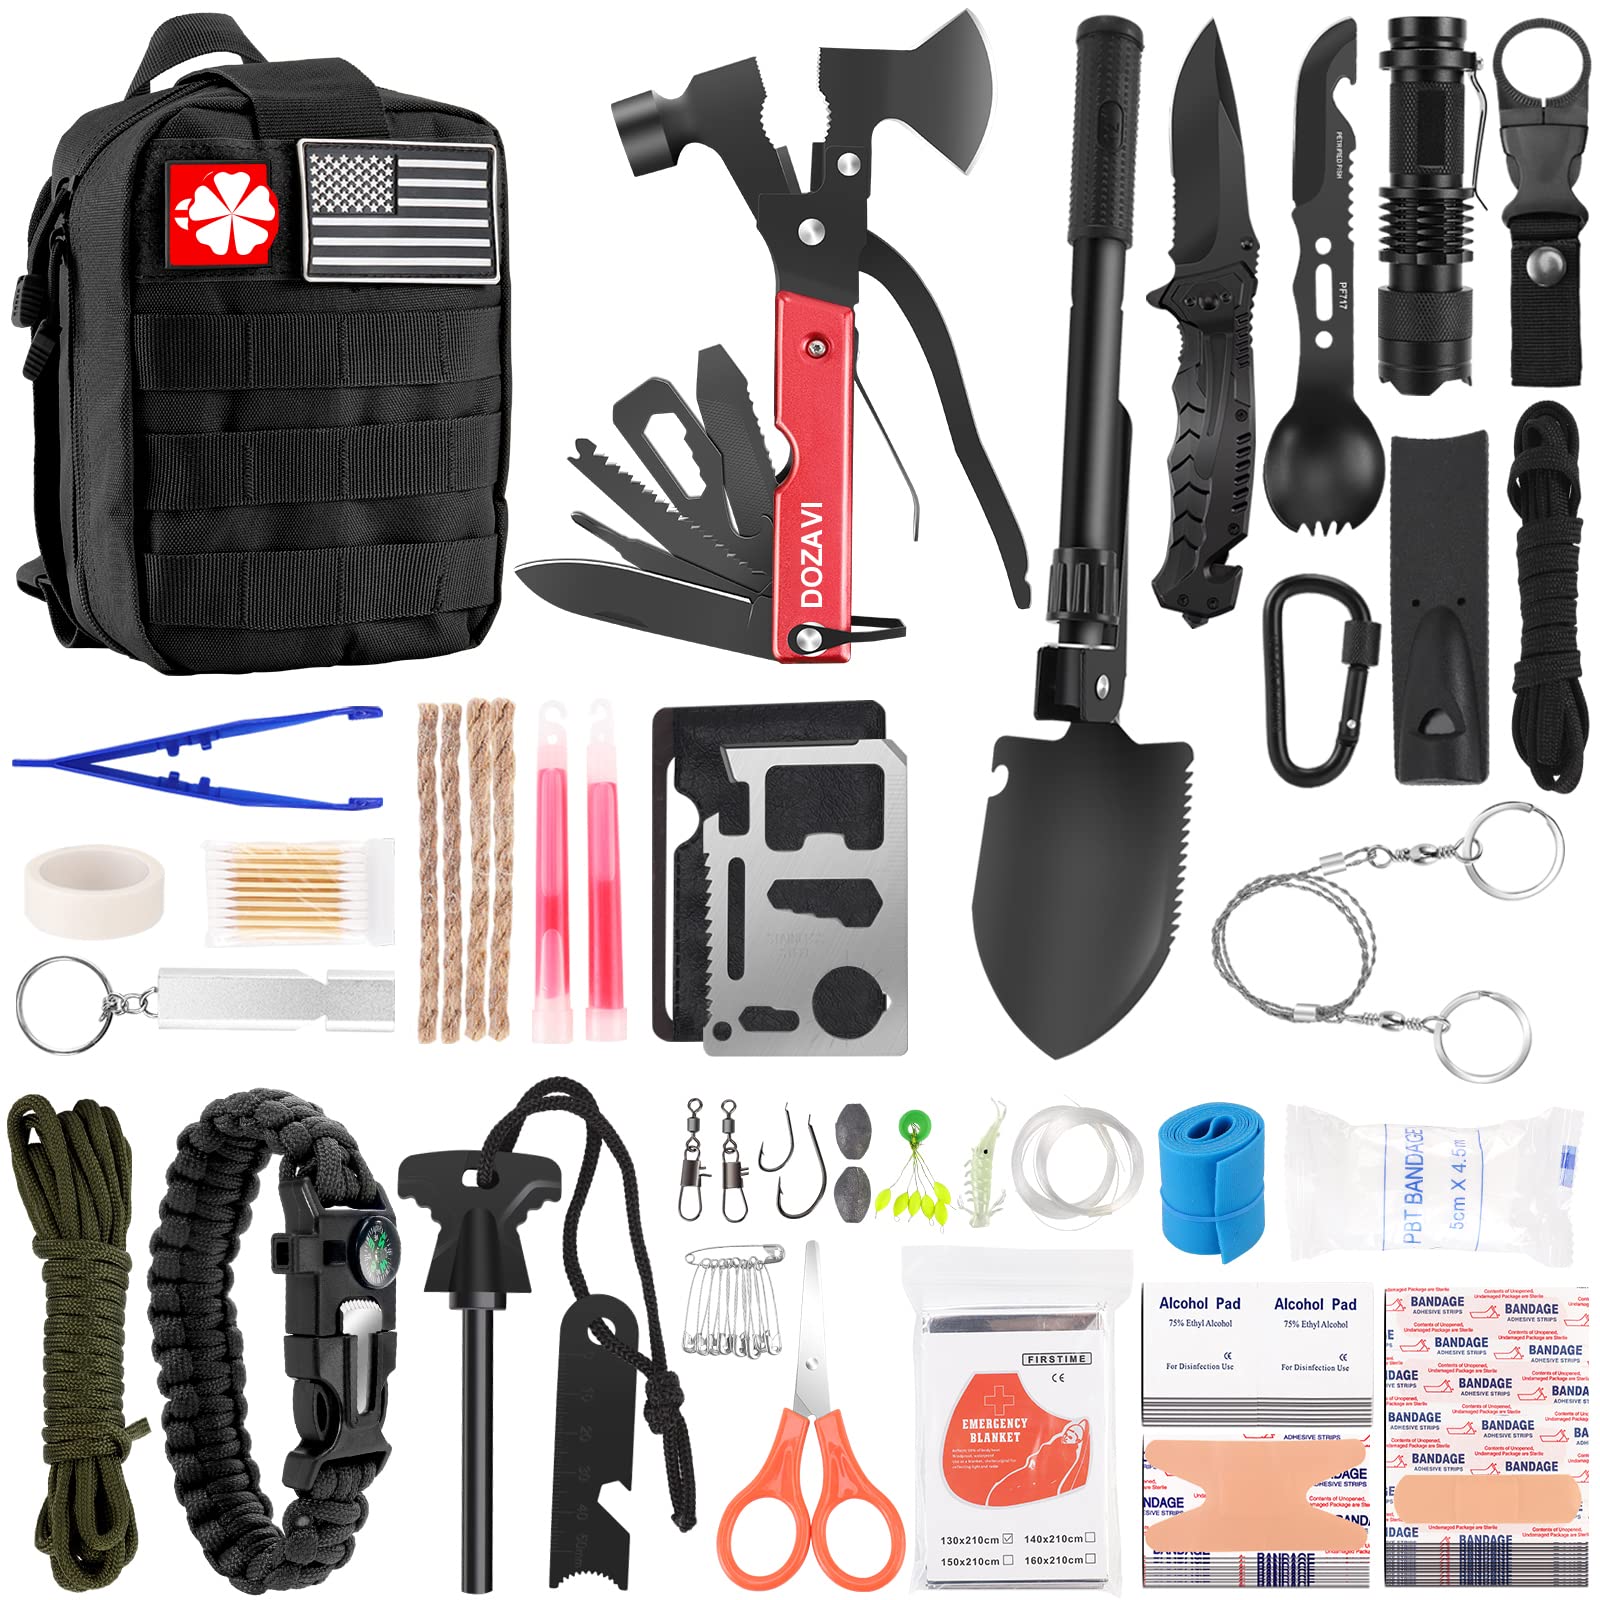 Gift for Father's Day Men Dad Husband,142 Pcs Survival Kit and First Aid Kit,  Professional Emergency Kits Survival Gear and Equipment with Molle Pouch,  for Men Women Camping Outdoor Adventures Red